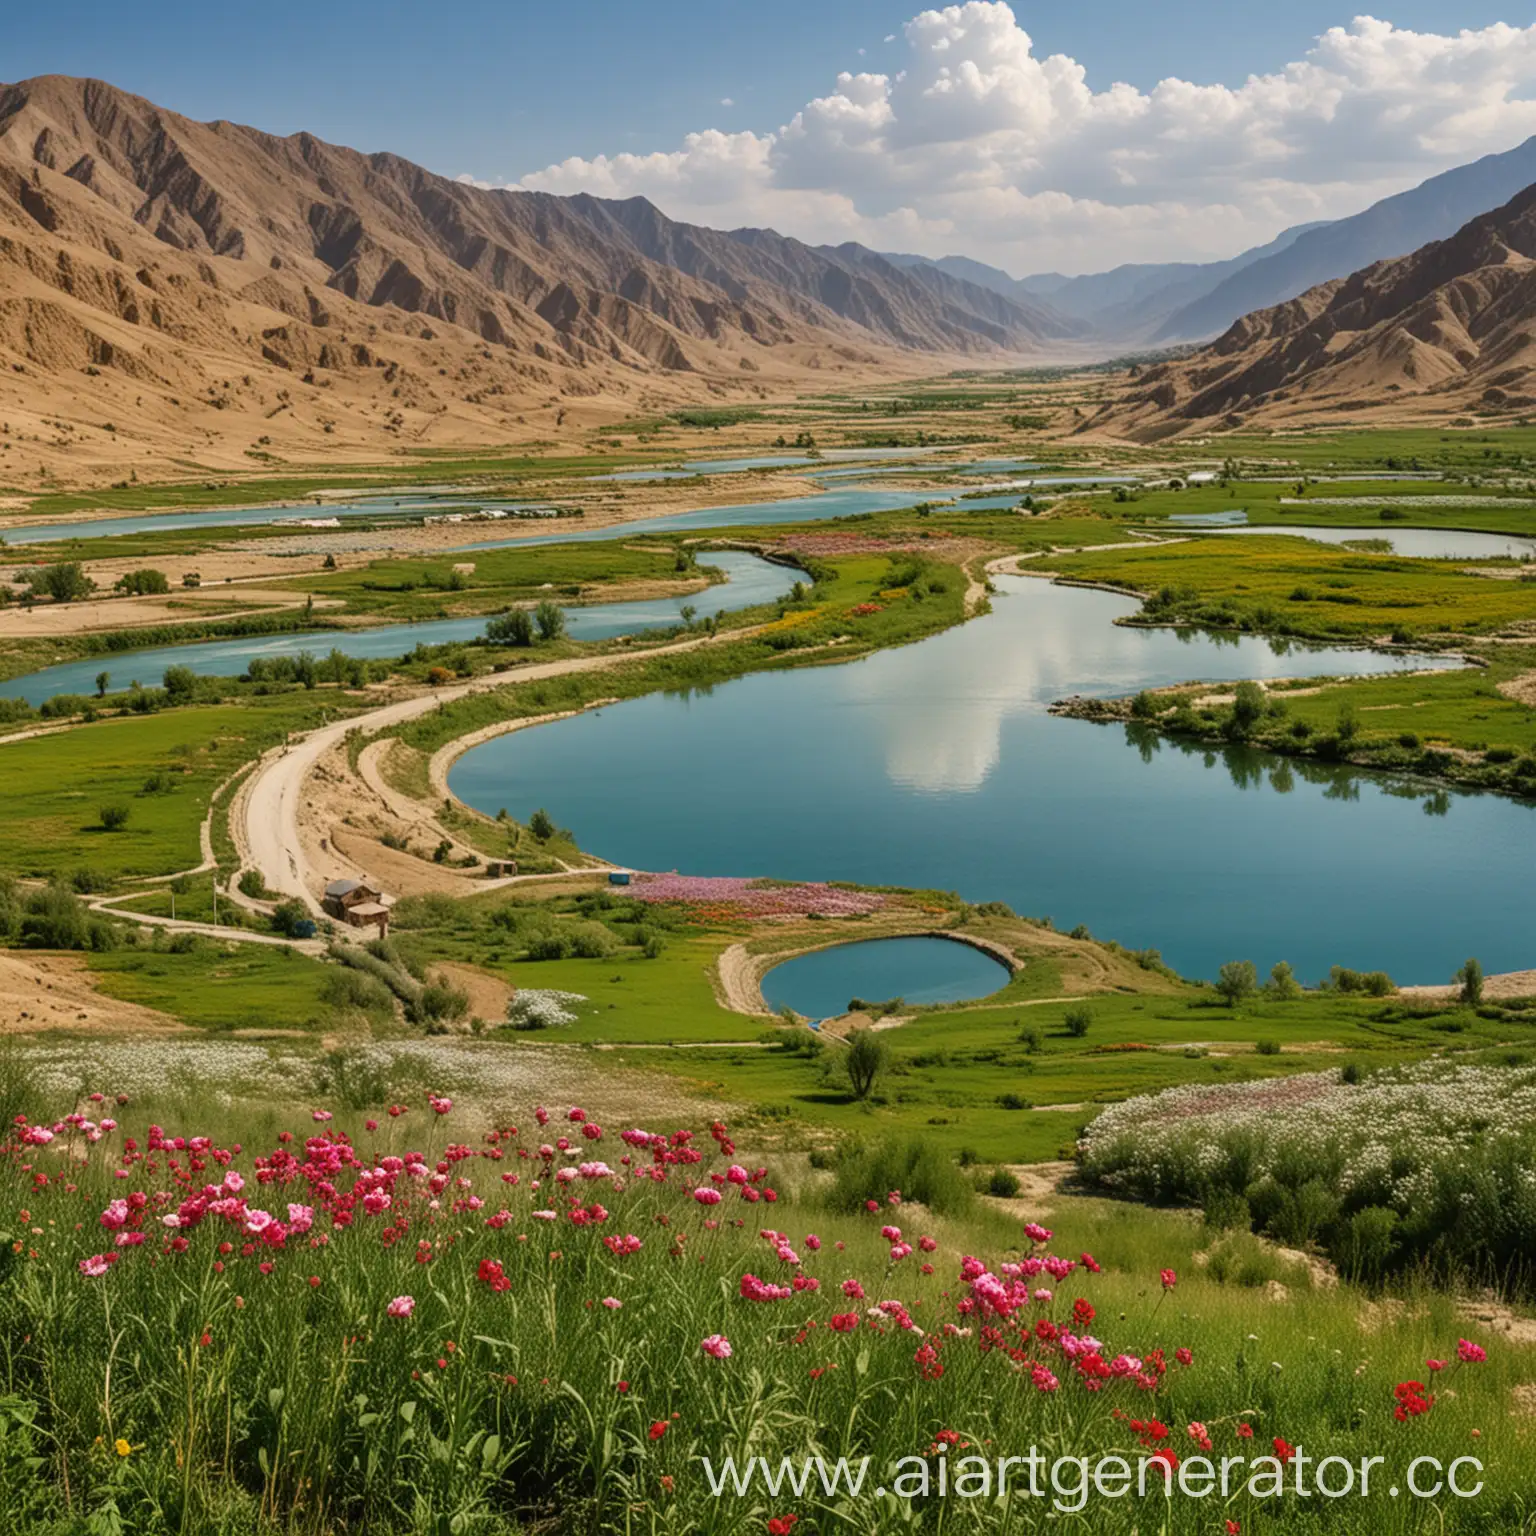 Picturesque-Turkmen-Landscape-Mountains-Lake-and-Blooming-Fields